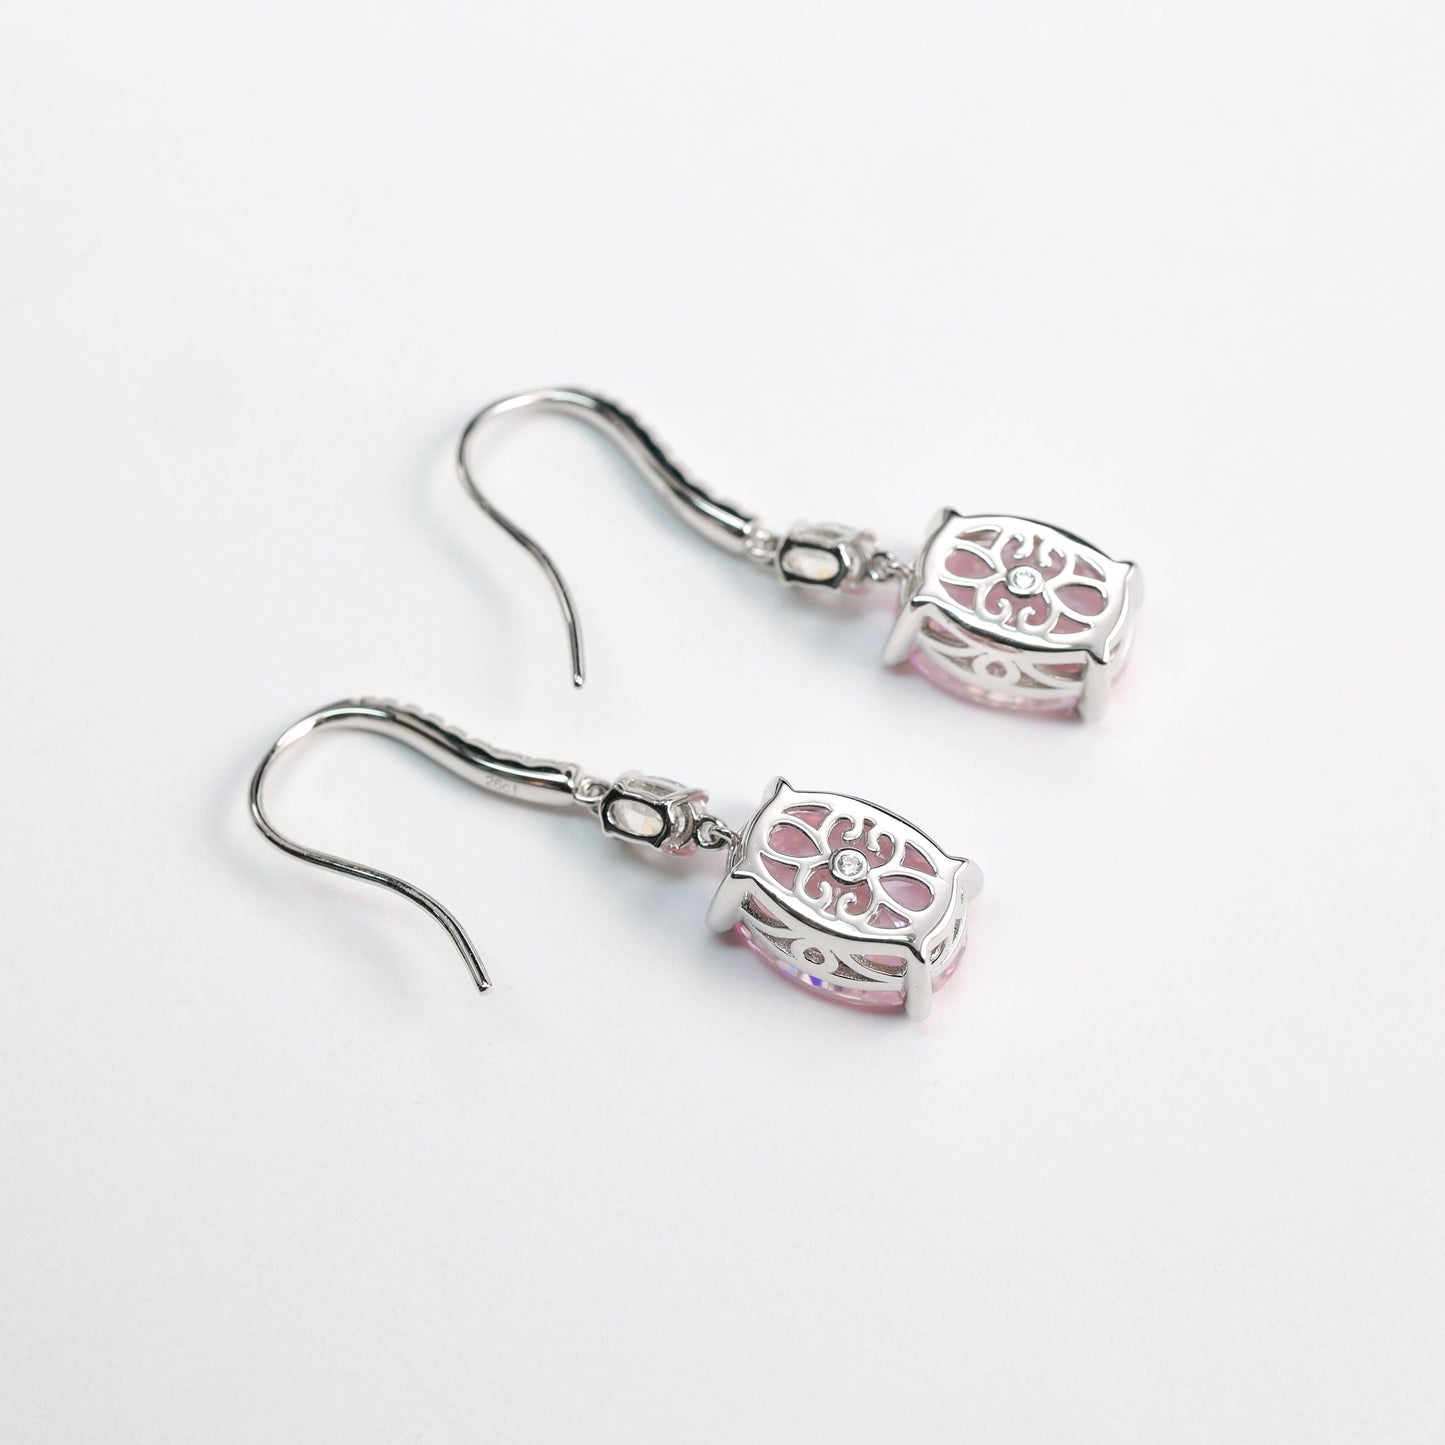 Micro-setting pink diamond color Lab created stones pigeon egg hook earrings, sterling silver